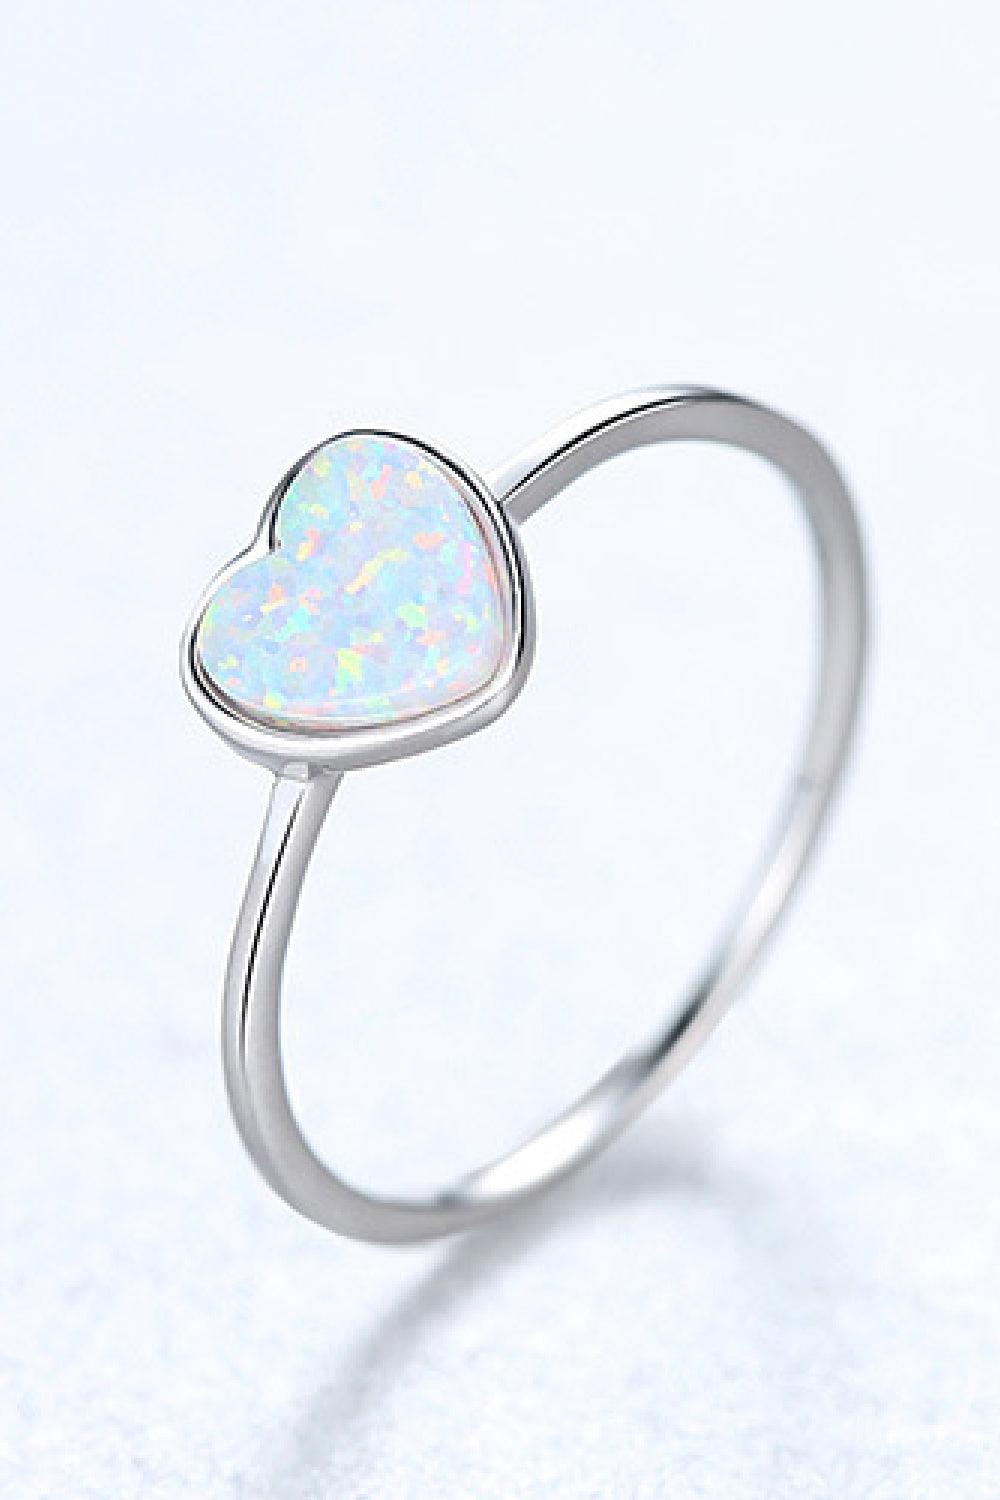 Opal Heart 925 Sterling Silver Ring - 808Lush